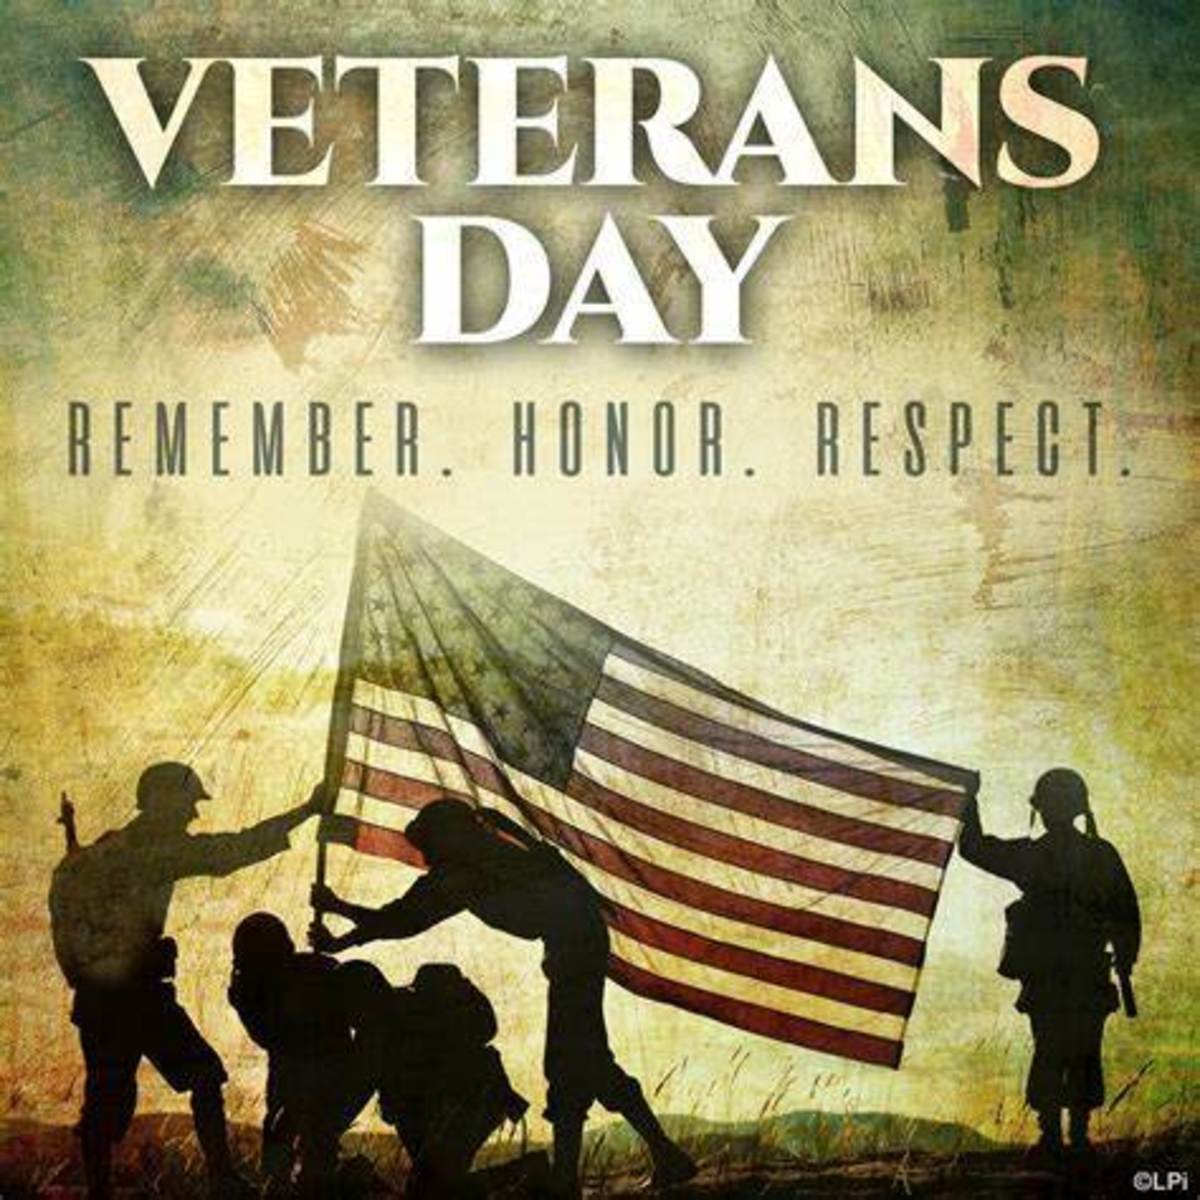 Veterans Day; thank all those that served, and especially remember all those that lost their lives serving